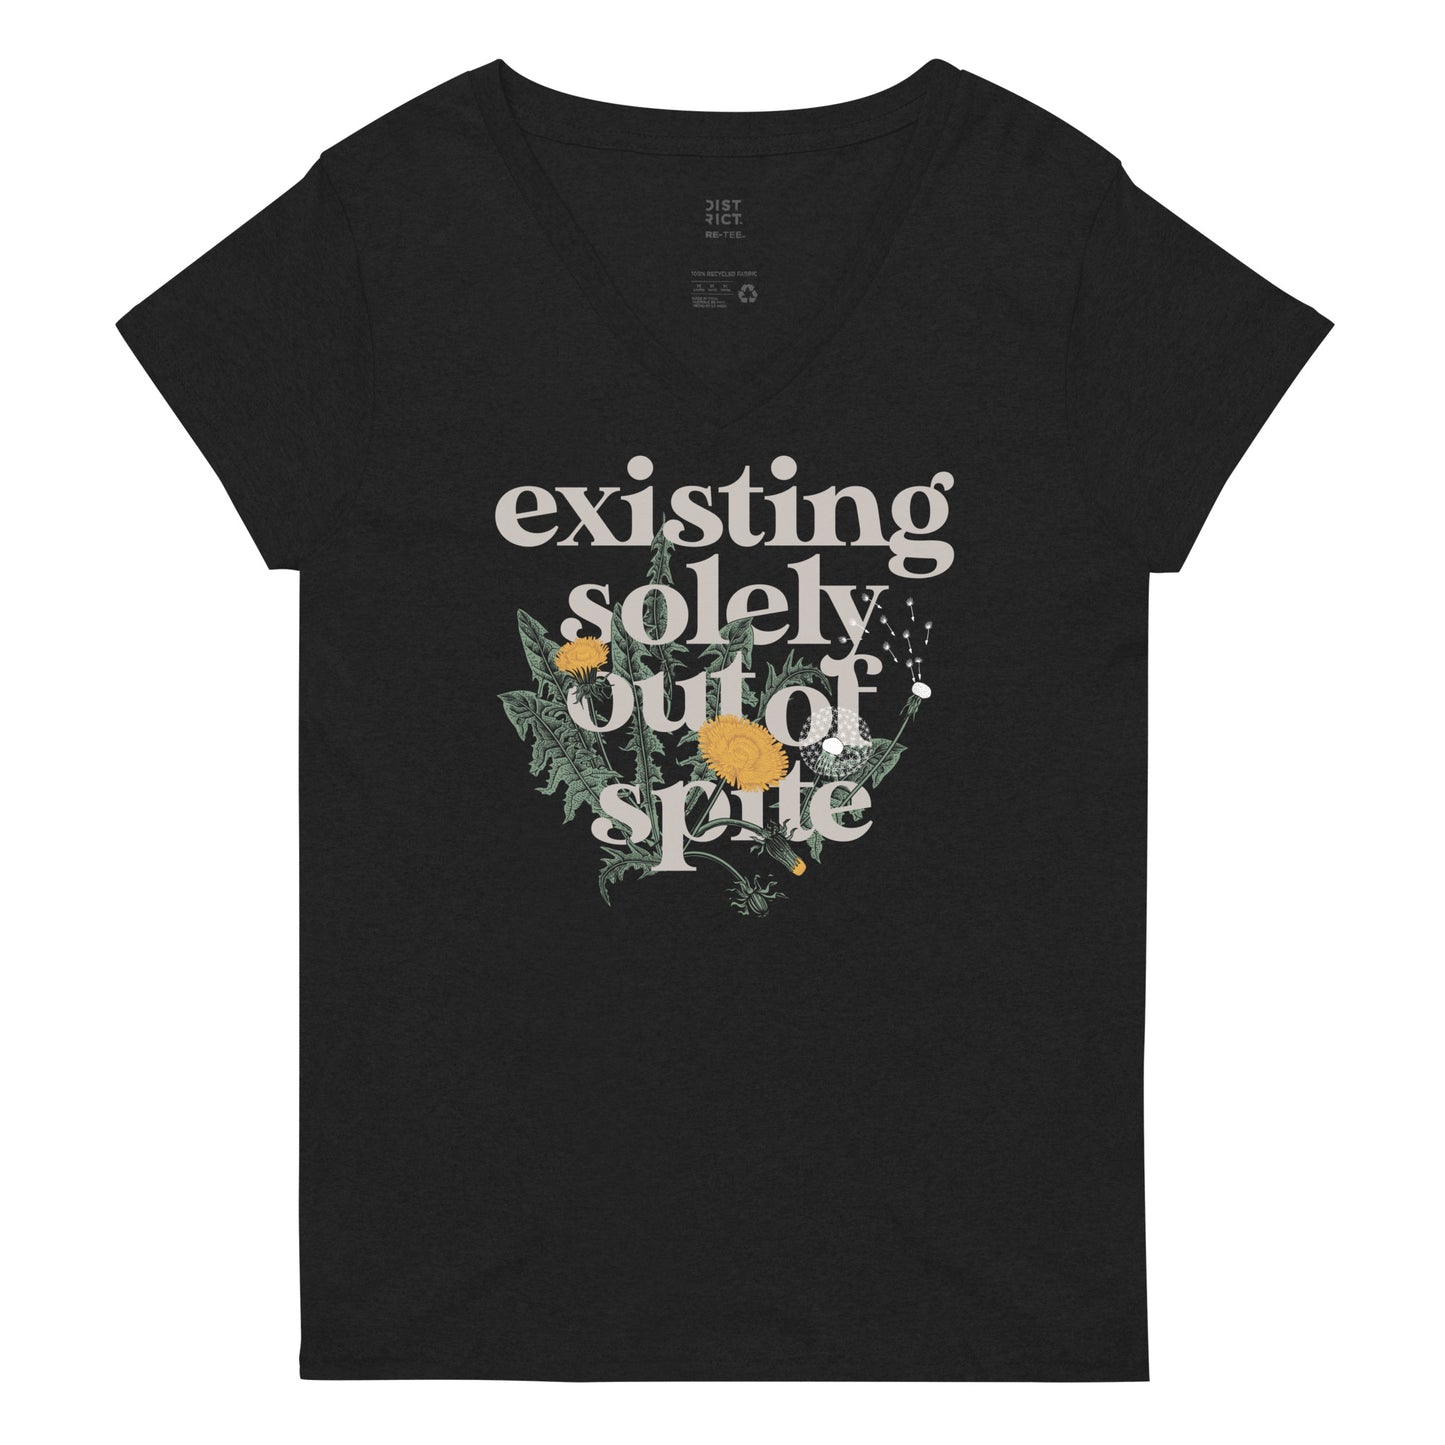 Existing Solely Out Of Spite Women's V-Neck Tee